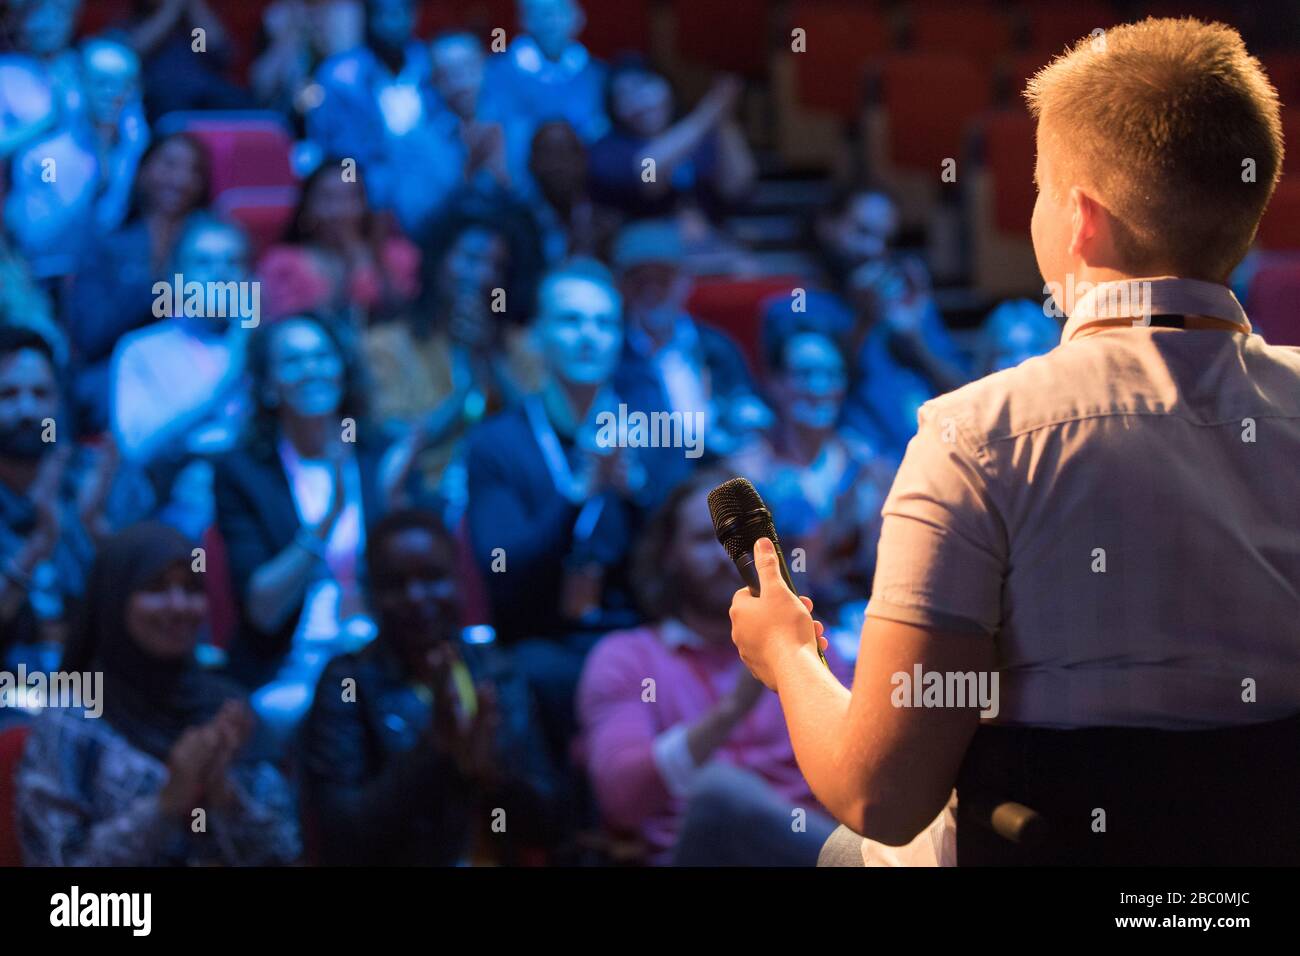 Female speaker in wheelchair with microphone on stage talking to audience Stock Photo